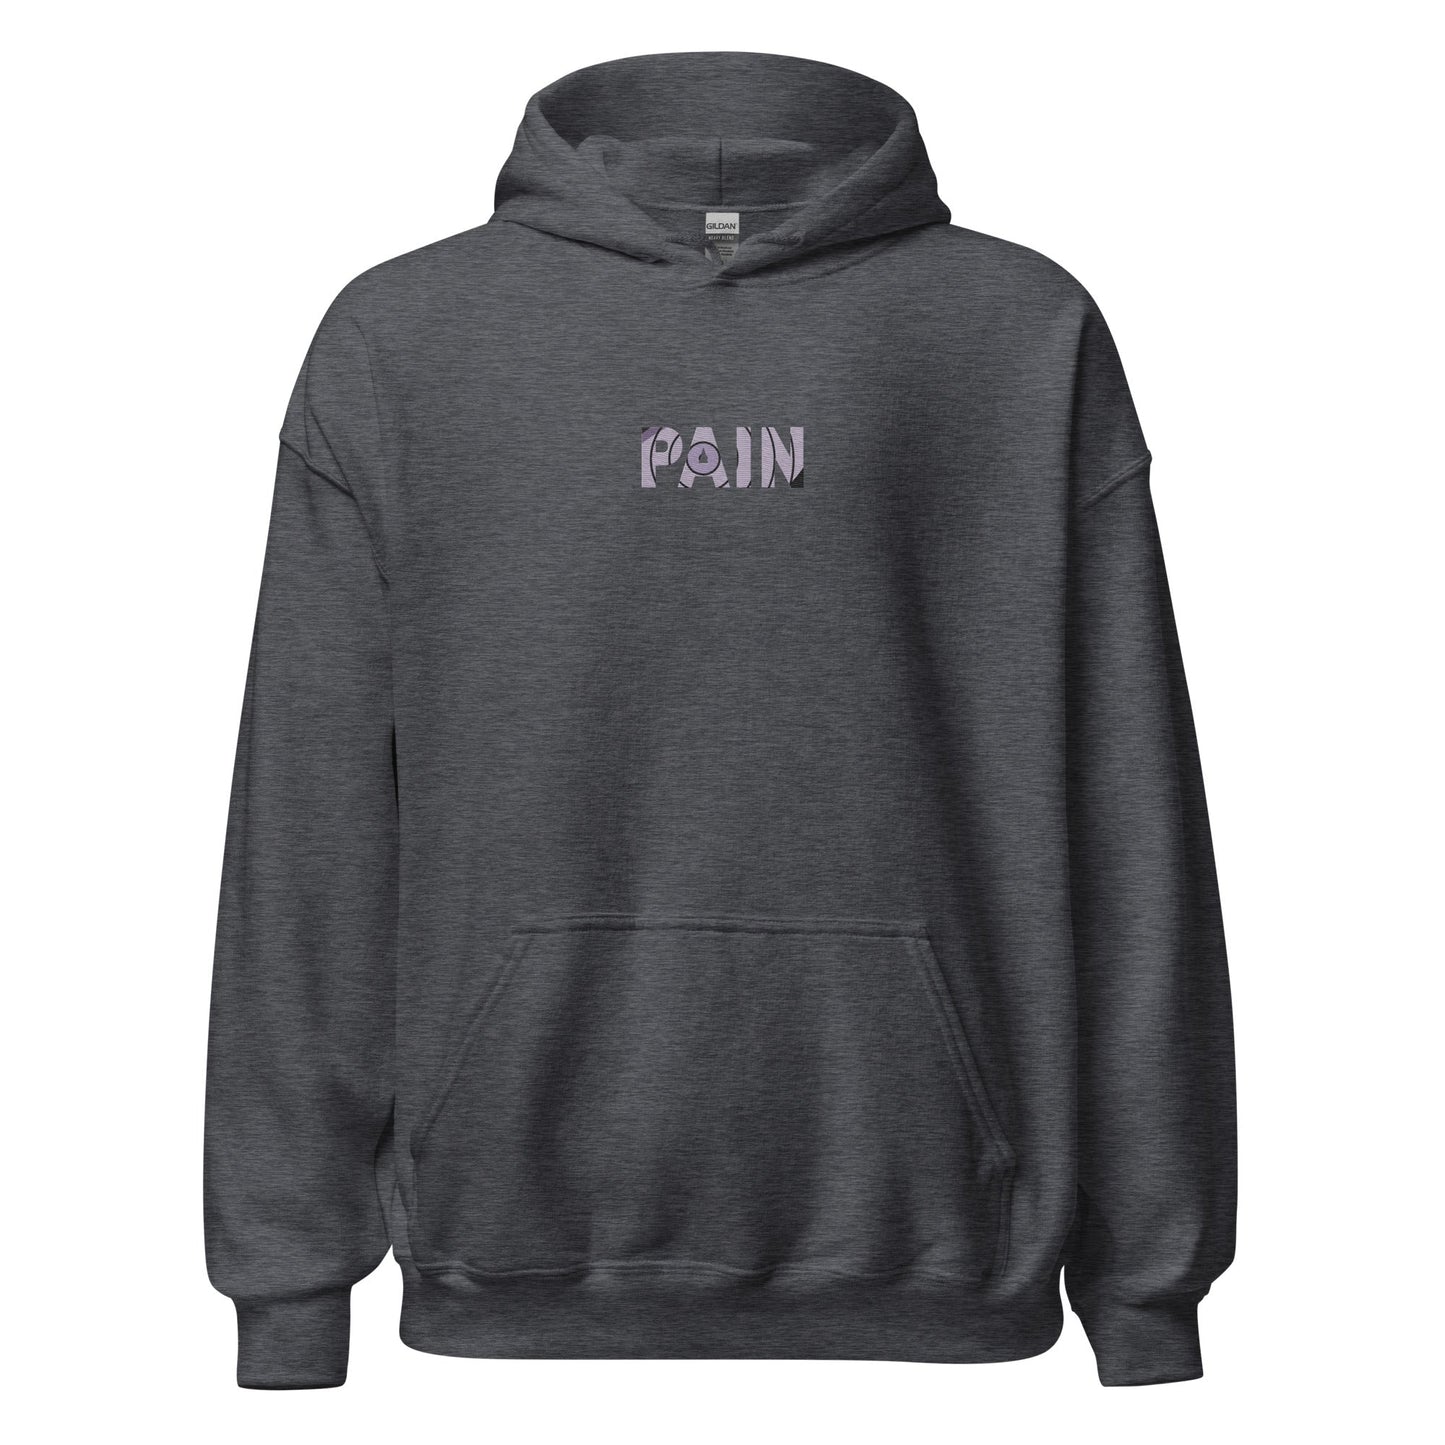 PAIN Embroidered Hoodie